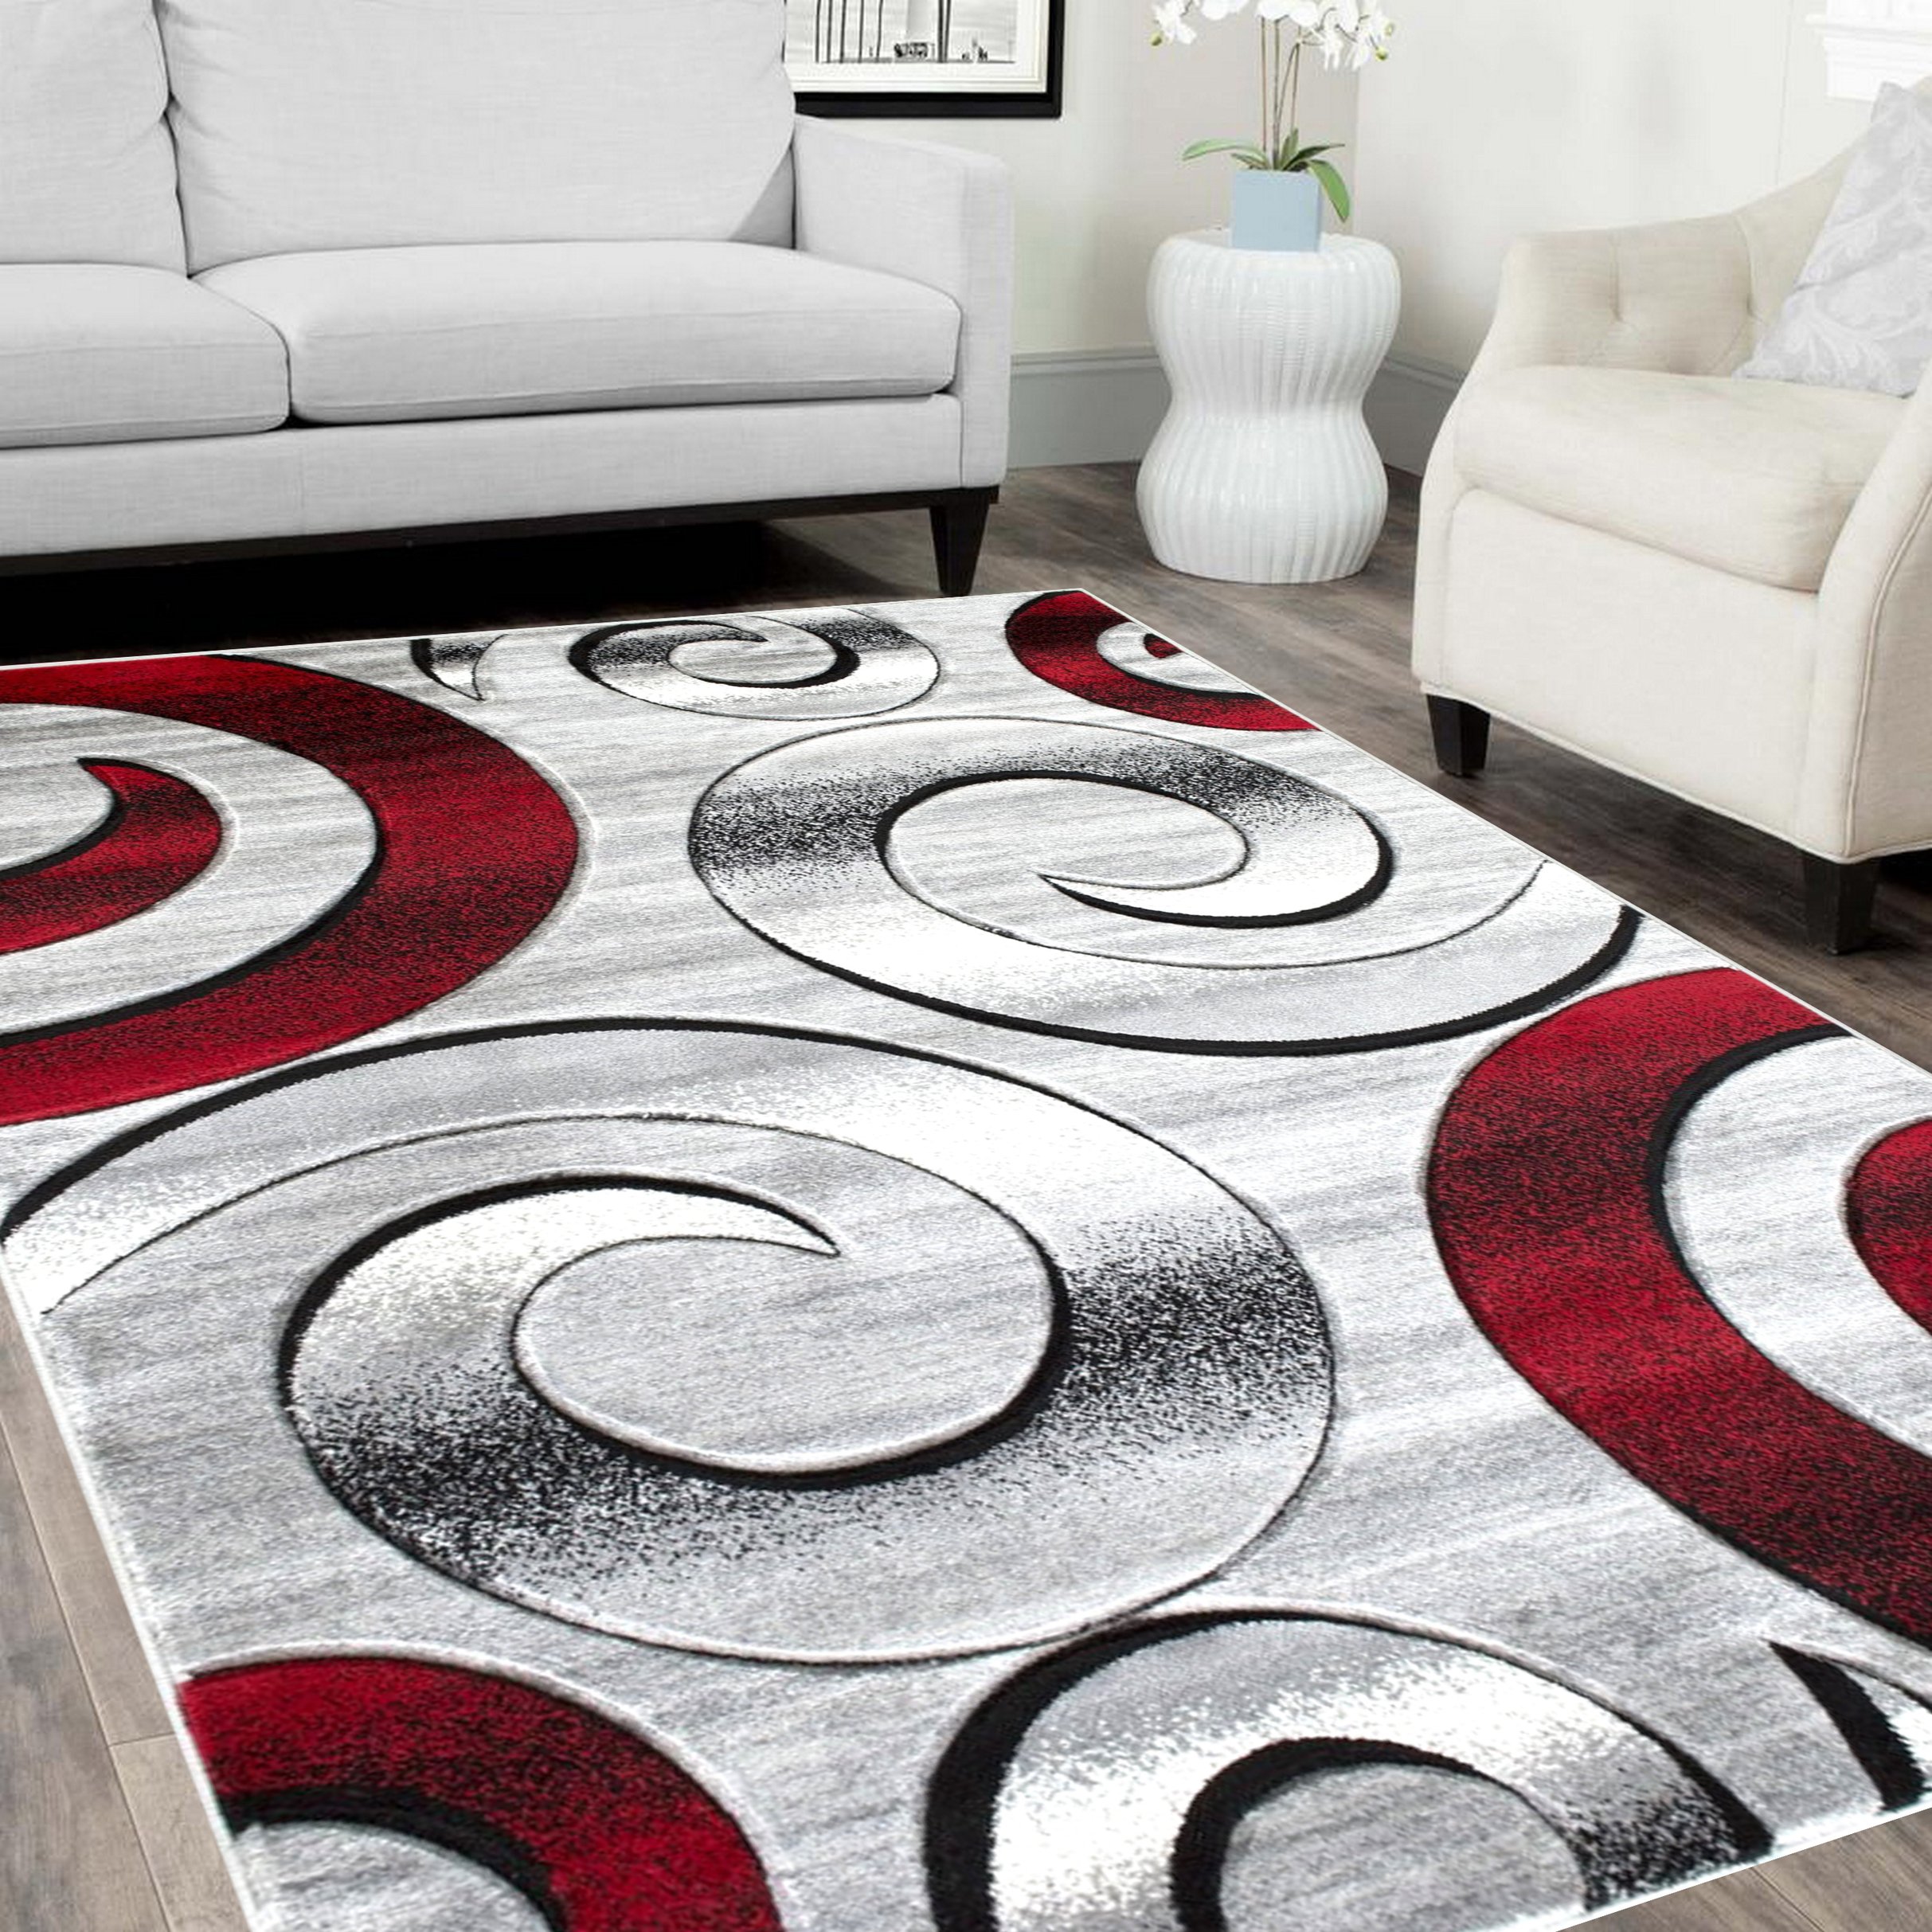 Handcraft Rugs-Swirls/Circles/Spiral Modern Contemporary abstrac tHand  Carved Area Rug-Silver/Lava Red/Gray/Black